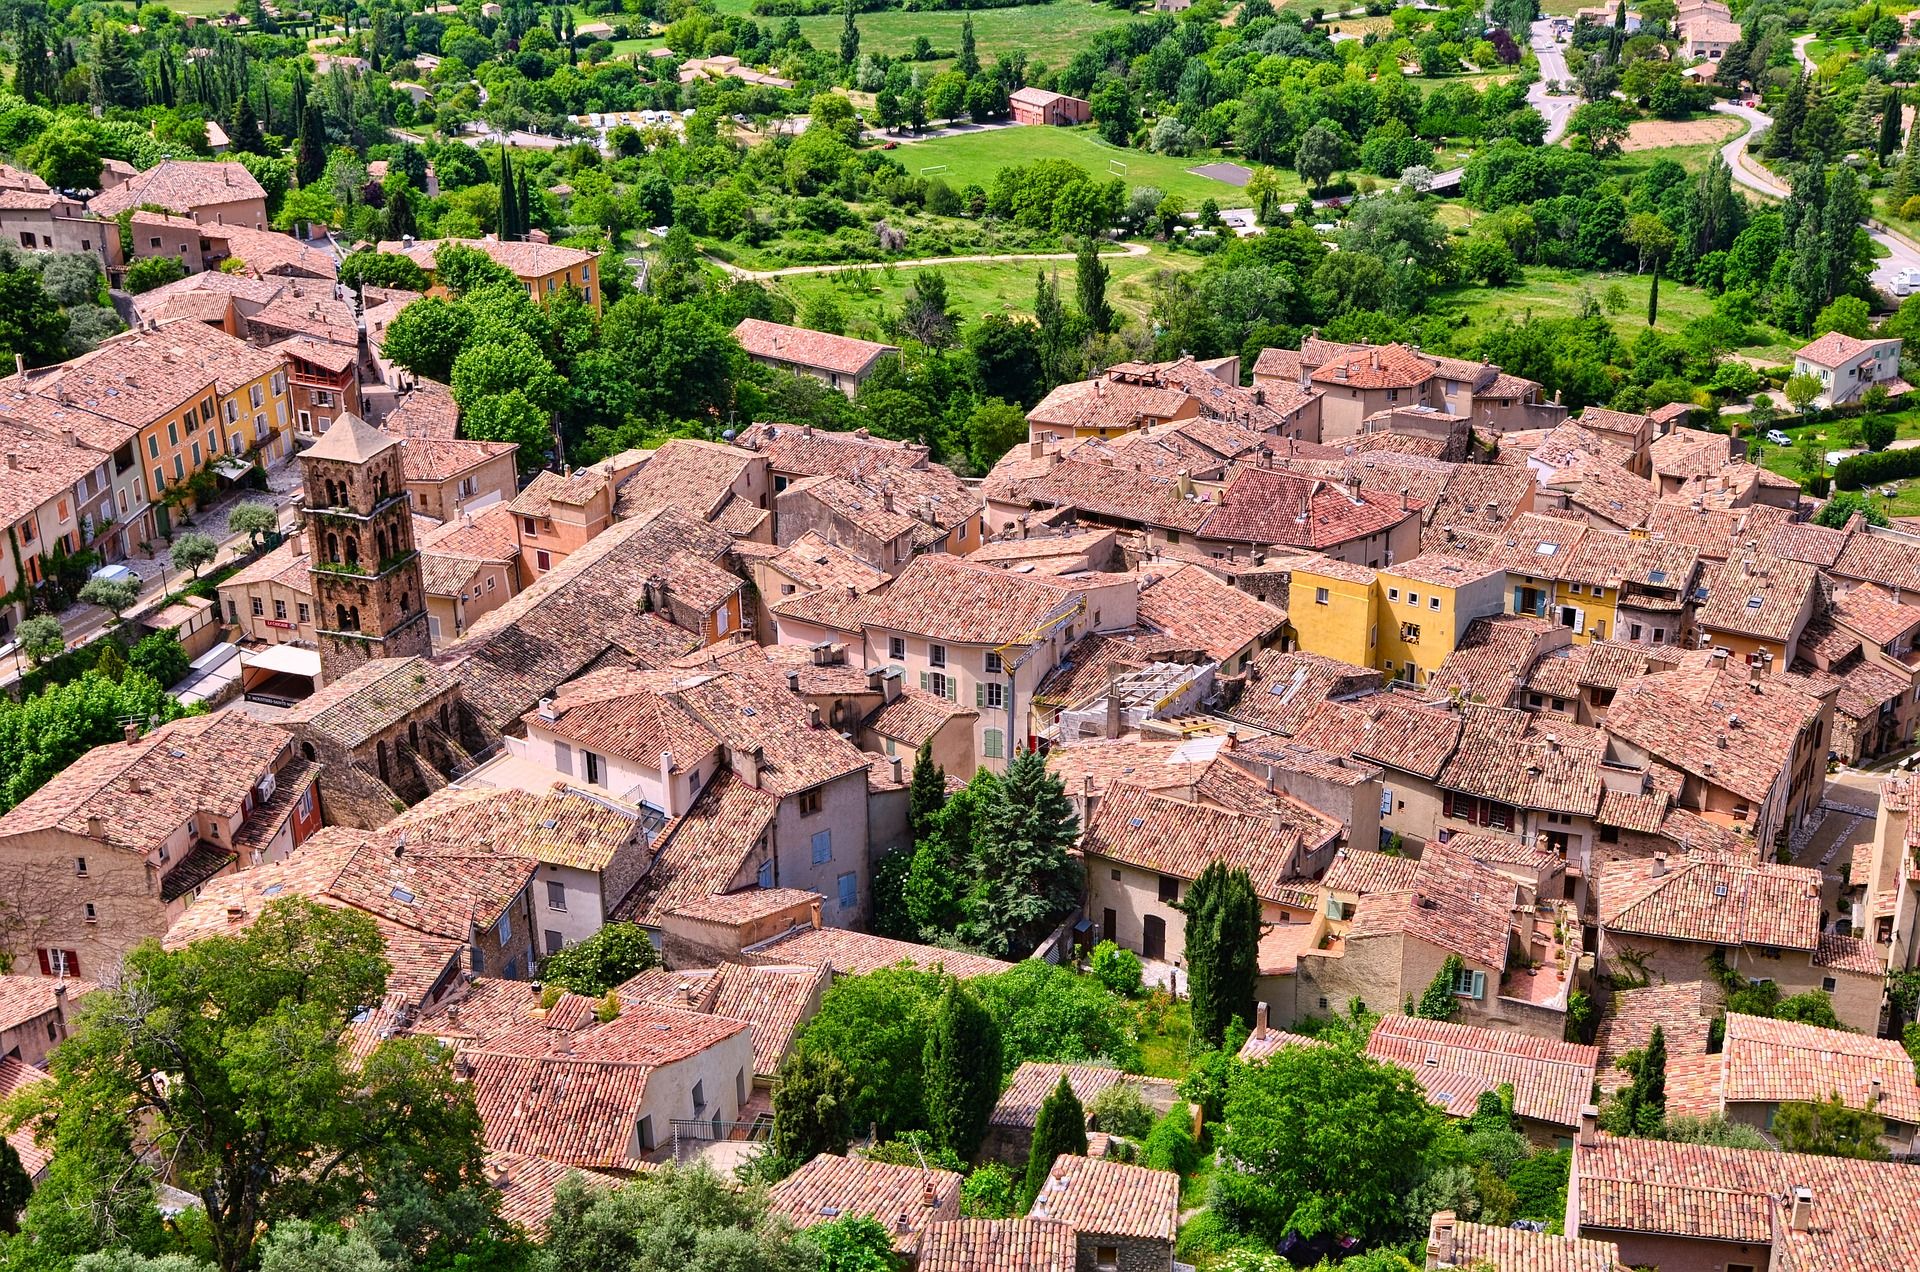 An aerial view of Moustiers-sainte-marie France